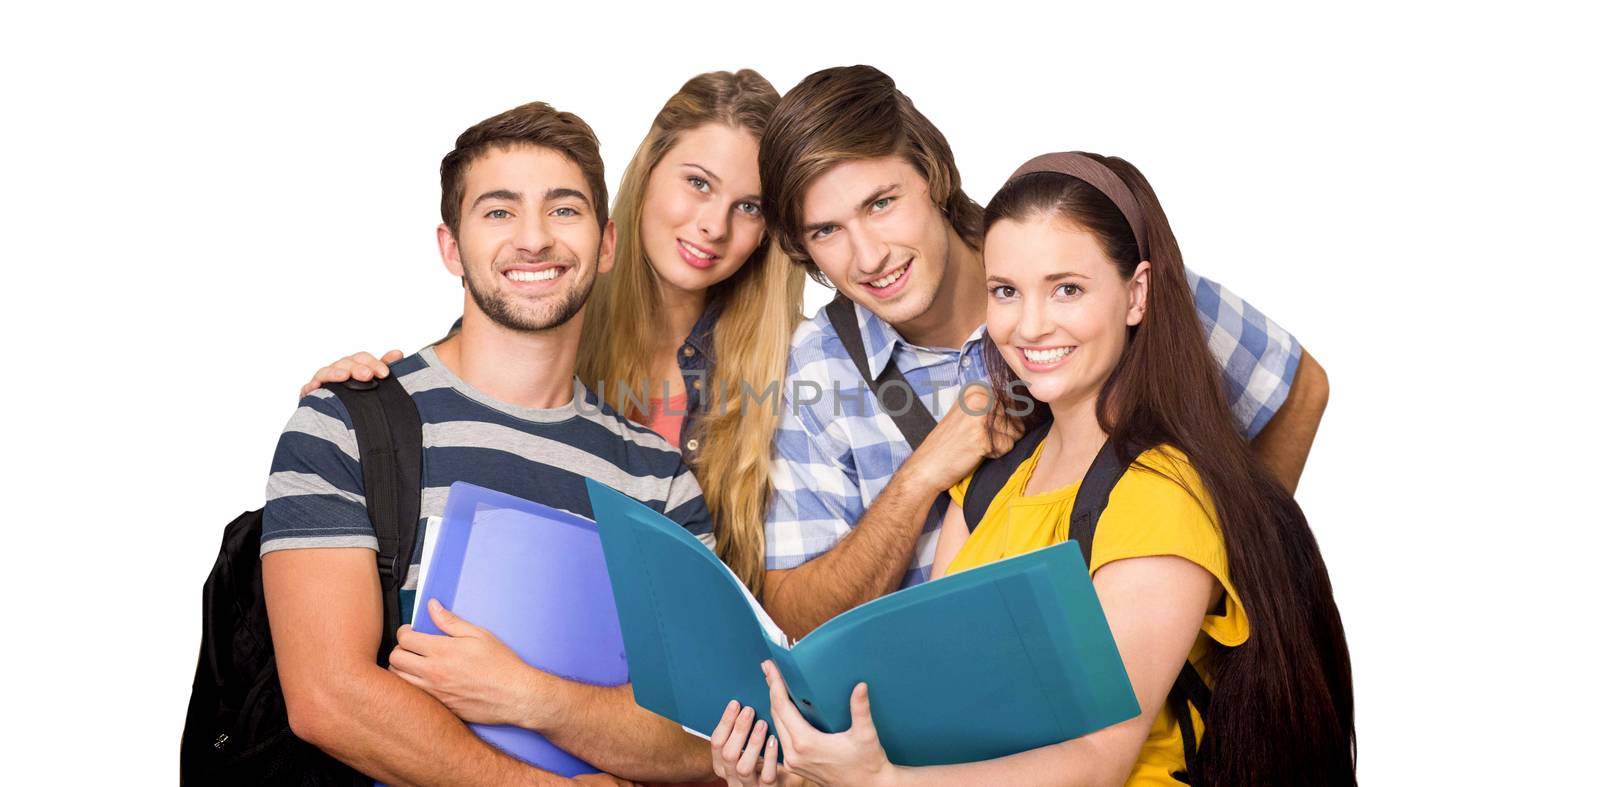 Composite image of students holding folders at college corridor by Wavebreakmedia